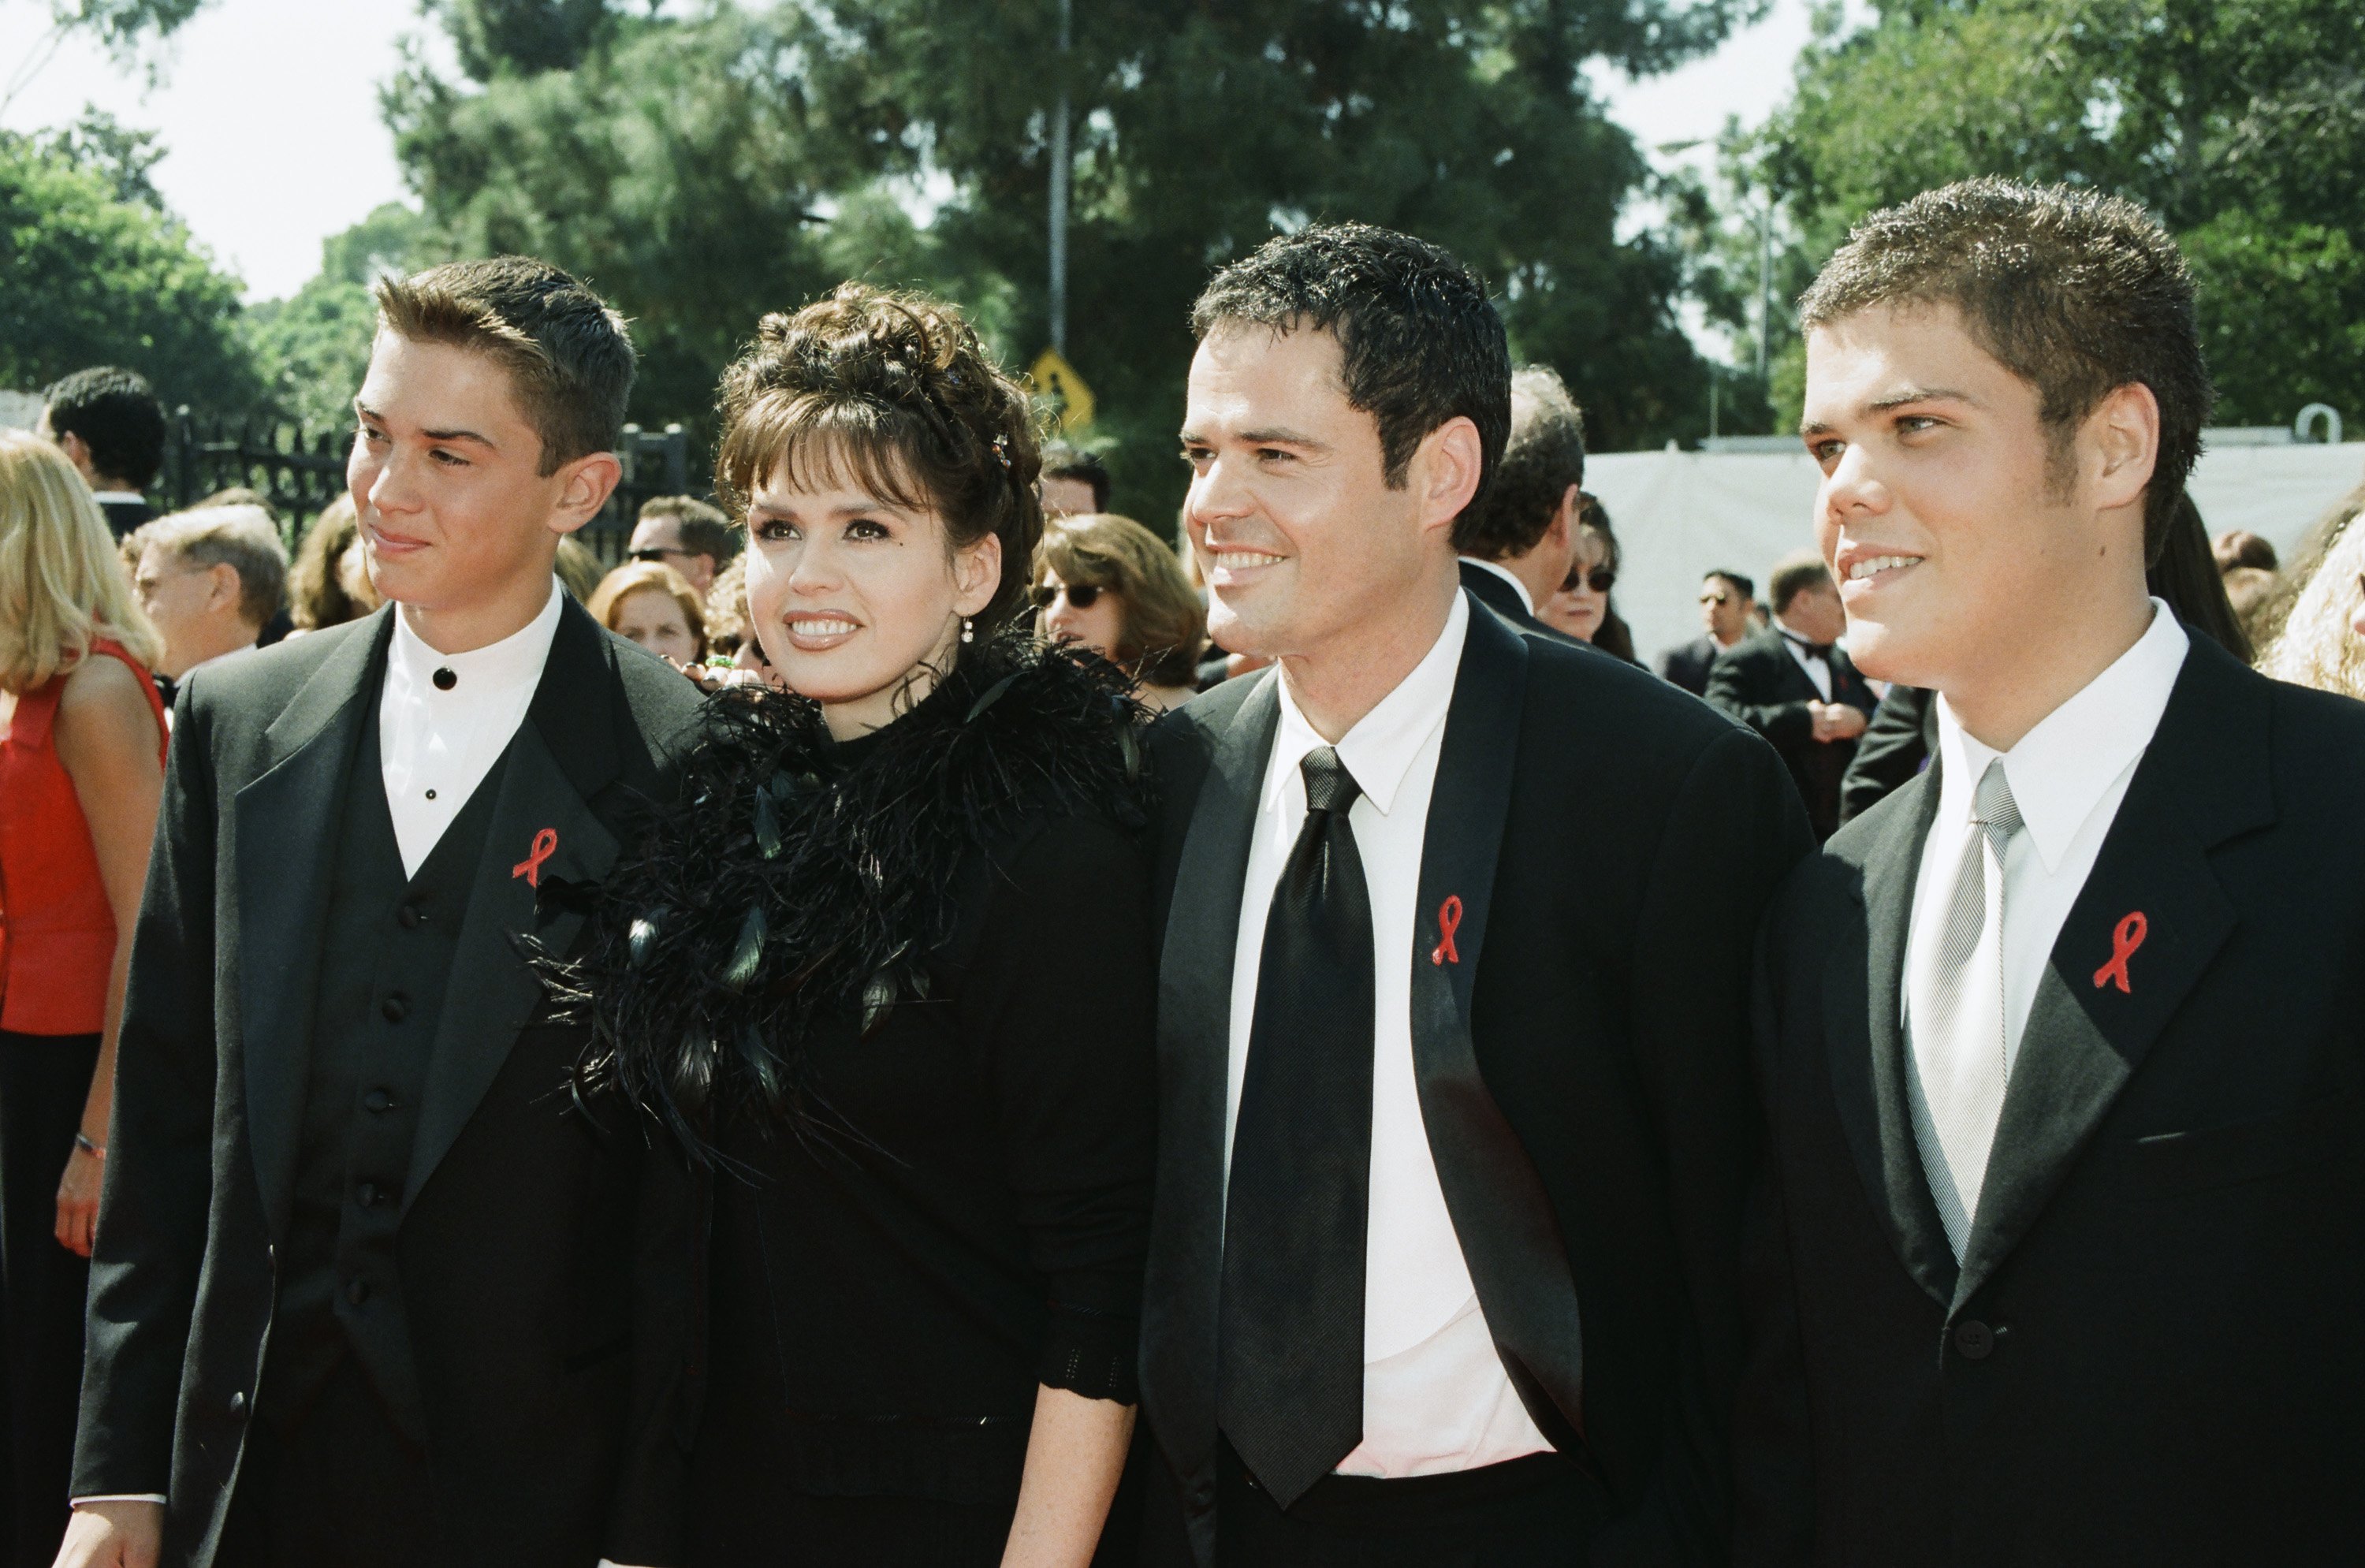 Marie Osmond with her sons Michael Blosil [Far Left]Brandon Osmond [Far Right] and brother Donny Osmond at the Shrine Auditorium in Los Angeles, CA on September 13, 1998 |  Source: Getty Images